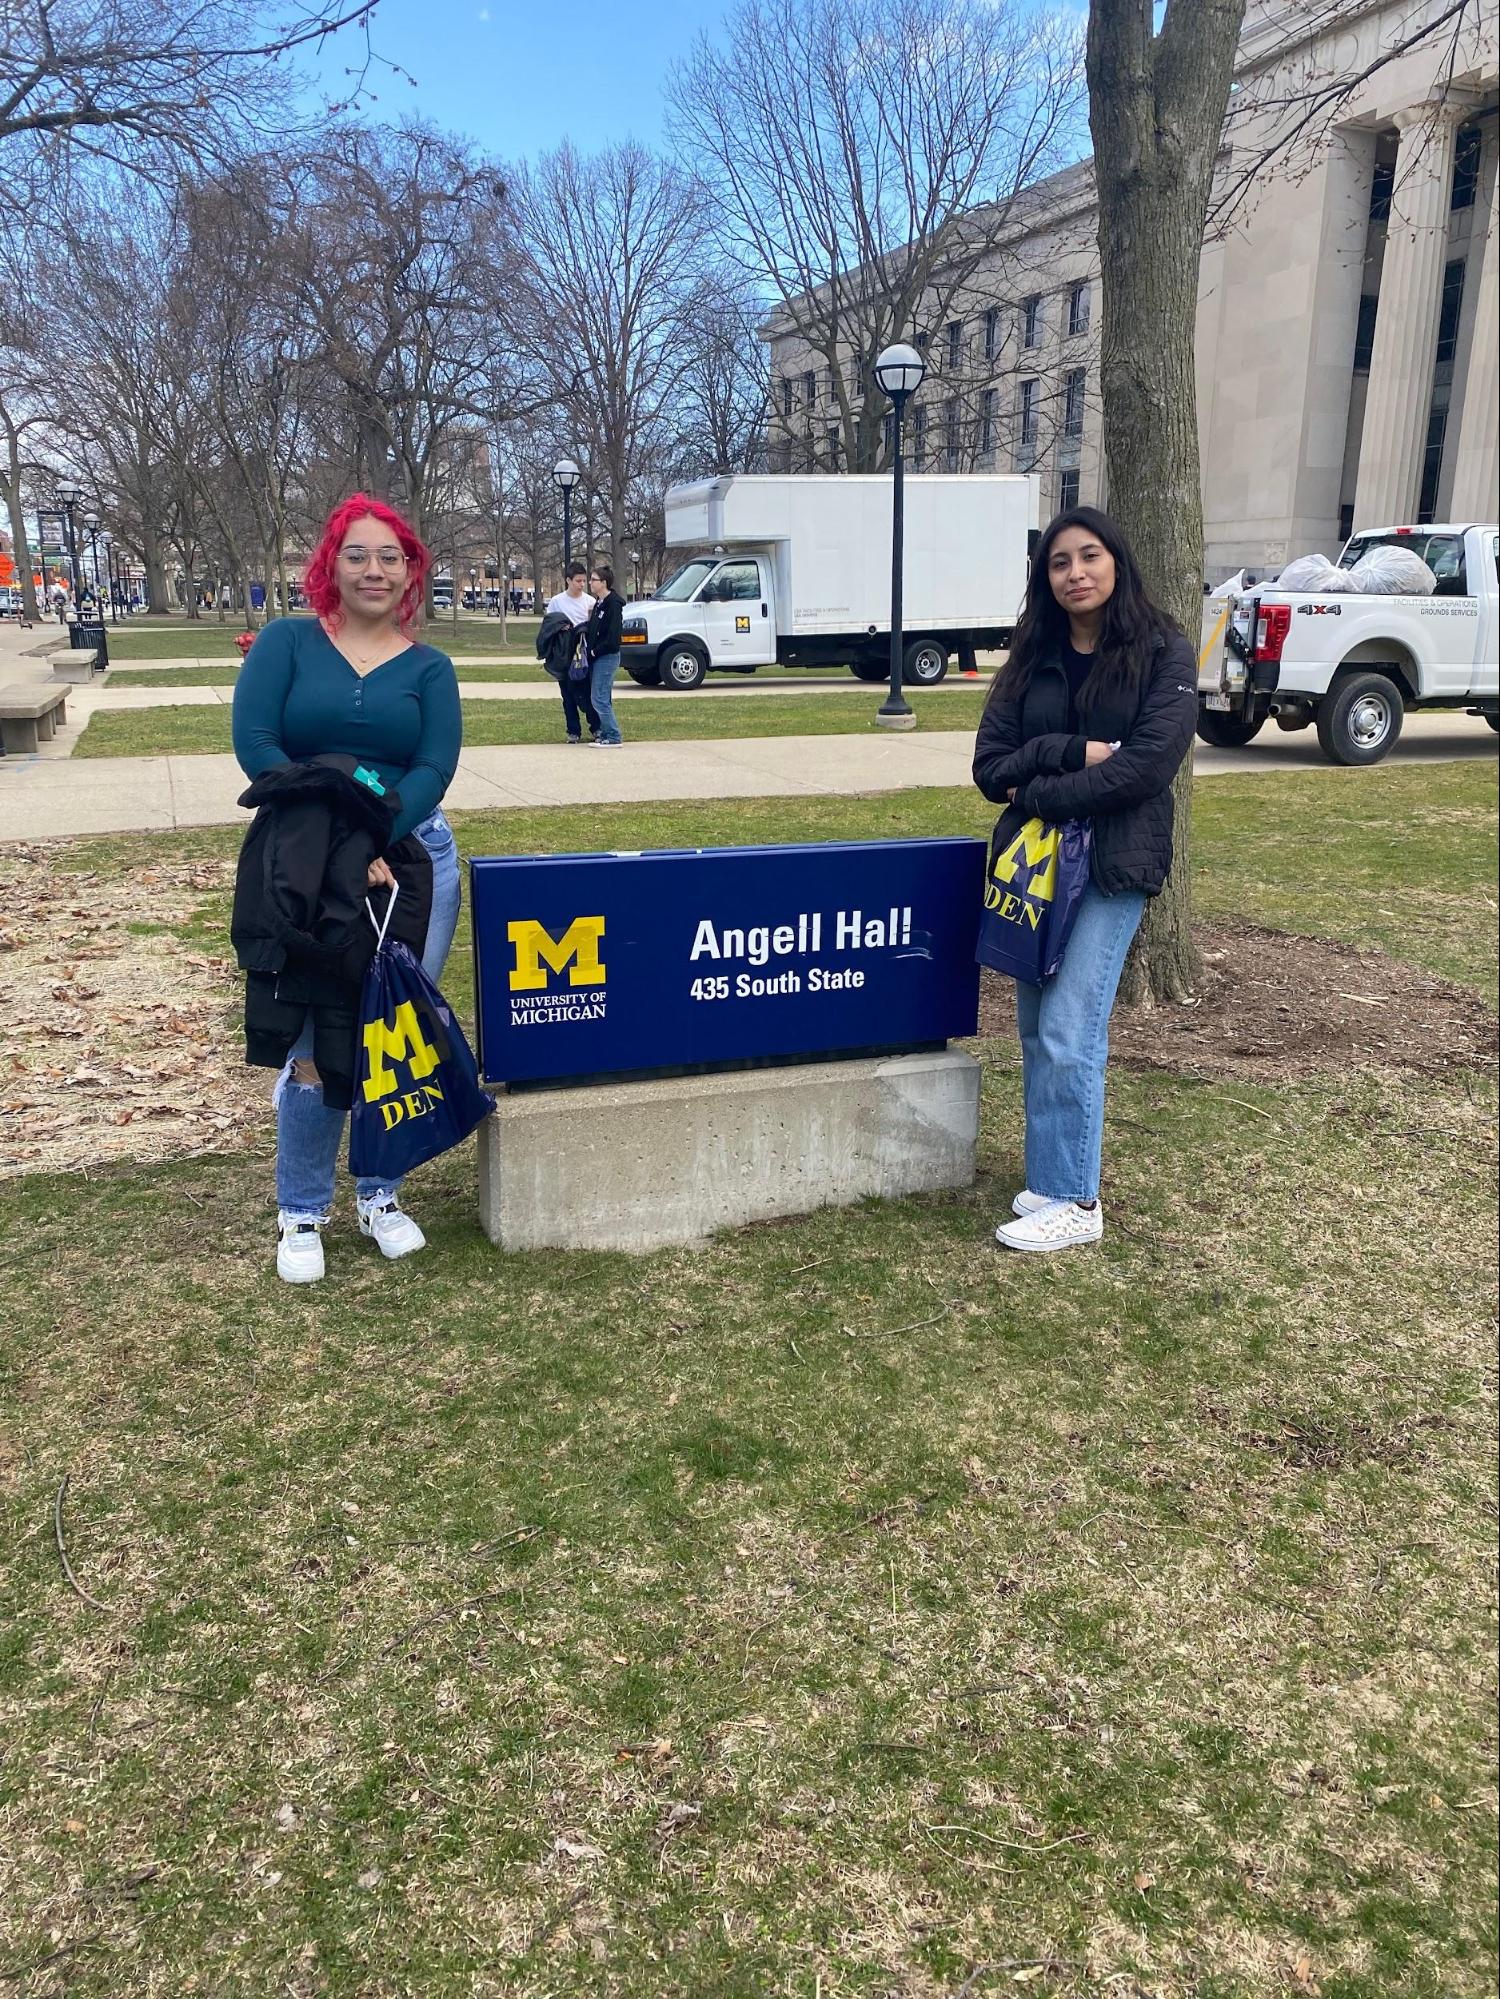 Harumi and classmate poses on University of Michigan Campus. THey are b oth standing in the grass next to the "Angel Hall" sign.